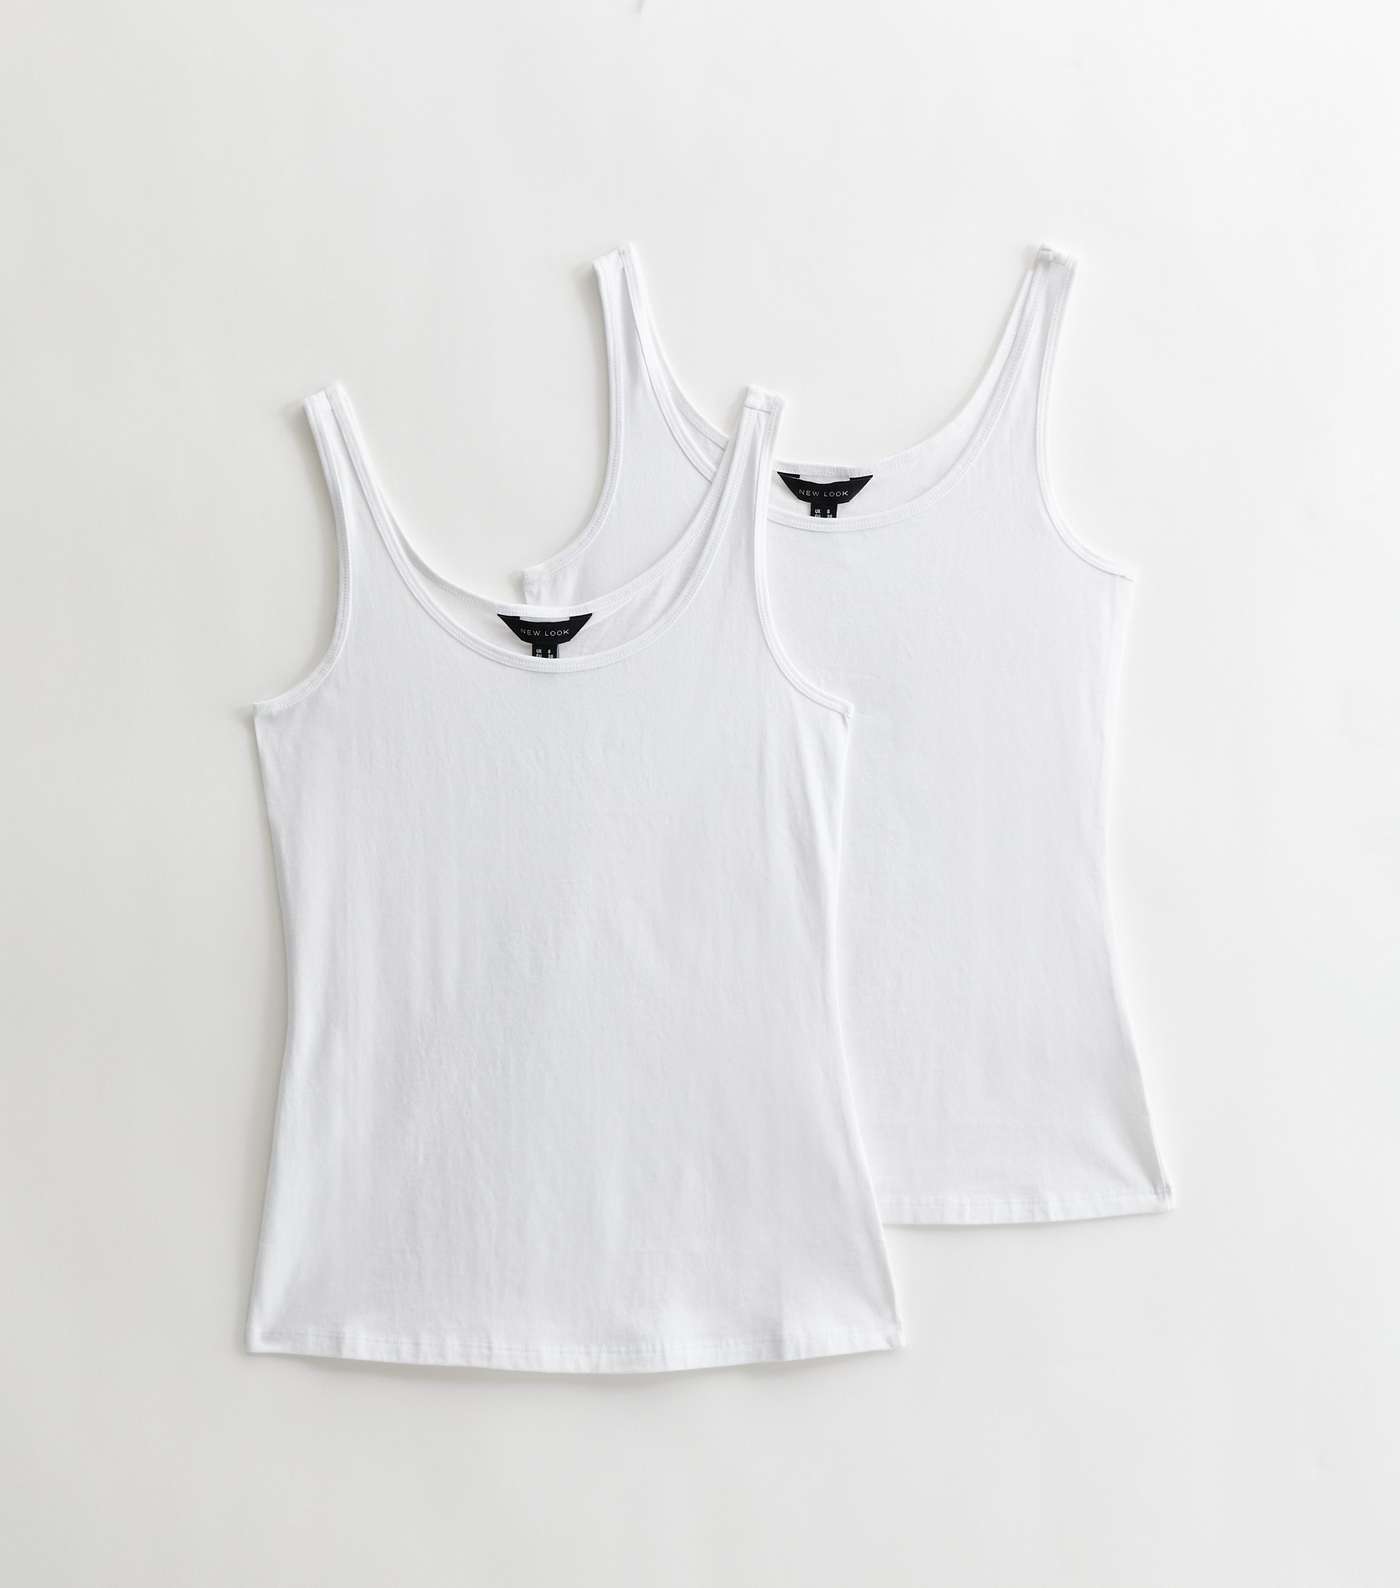 2 Pack White Jersey Vests Image 5